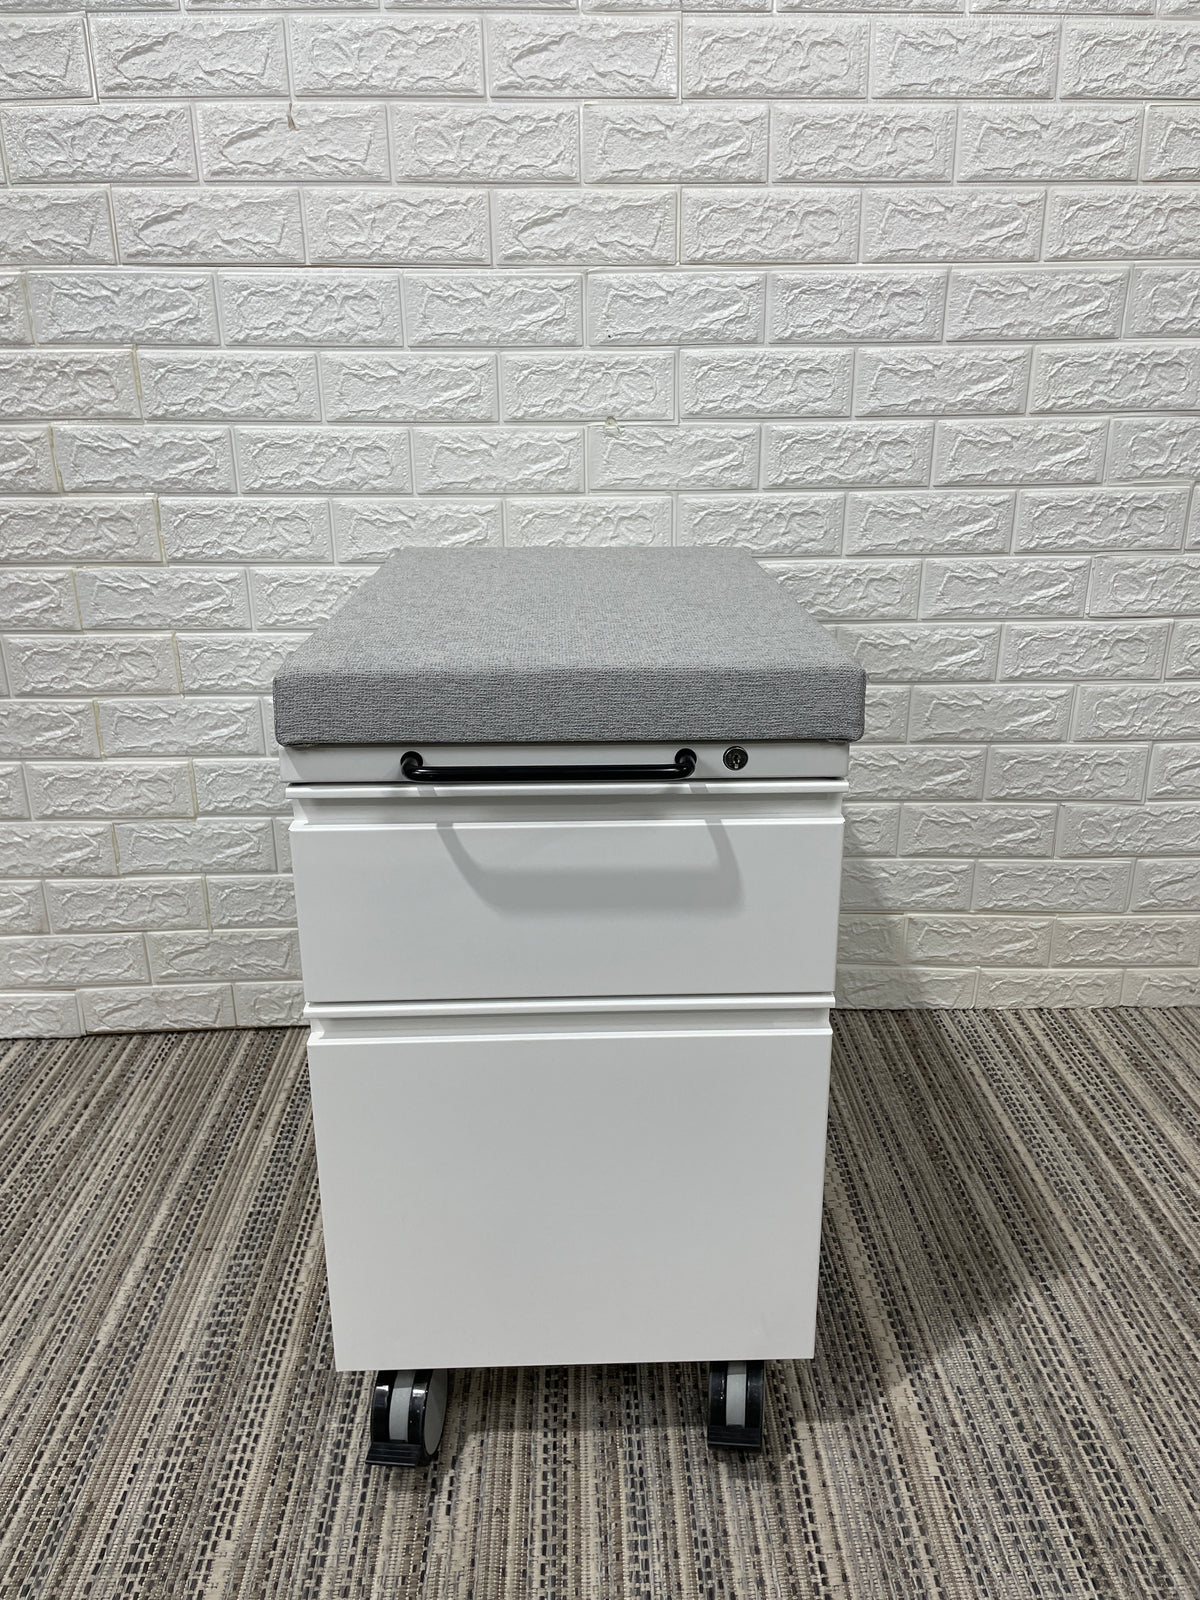 Pre-Owned Pedestals (SUDS) - Duckys Office Furniture